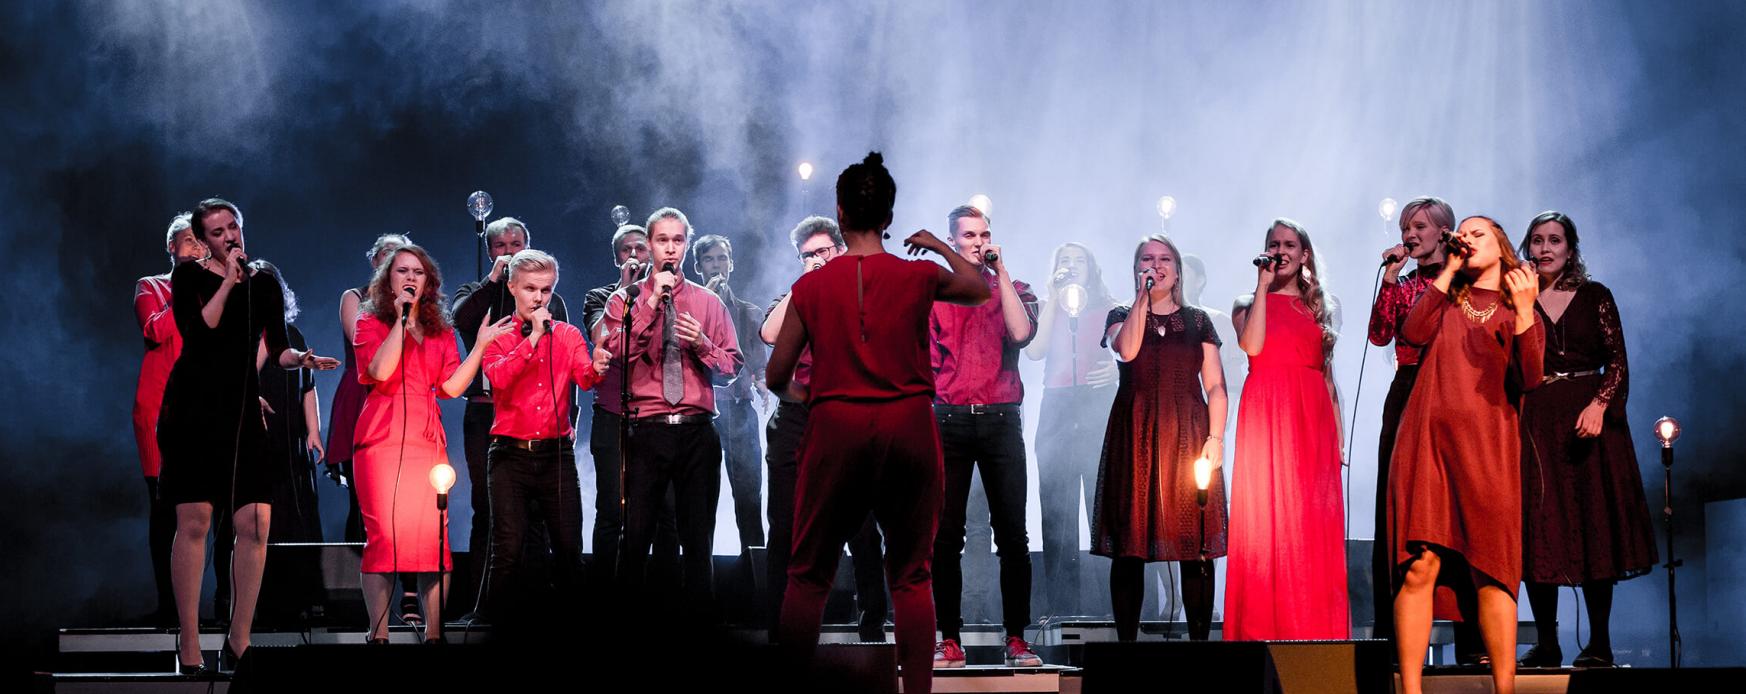 The Nordic Institute in Åland is 35 years old and offers a free concert with Musta Lammas